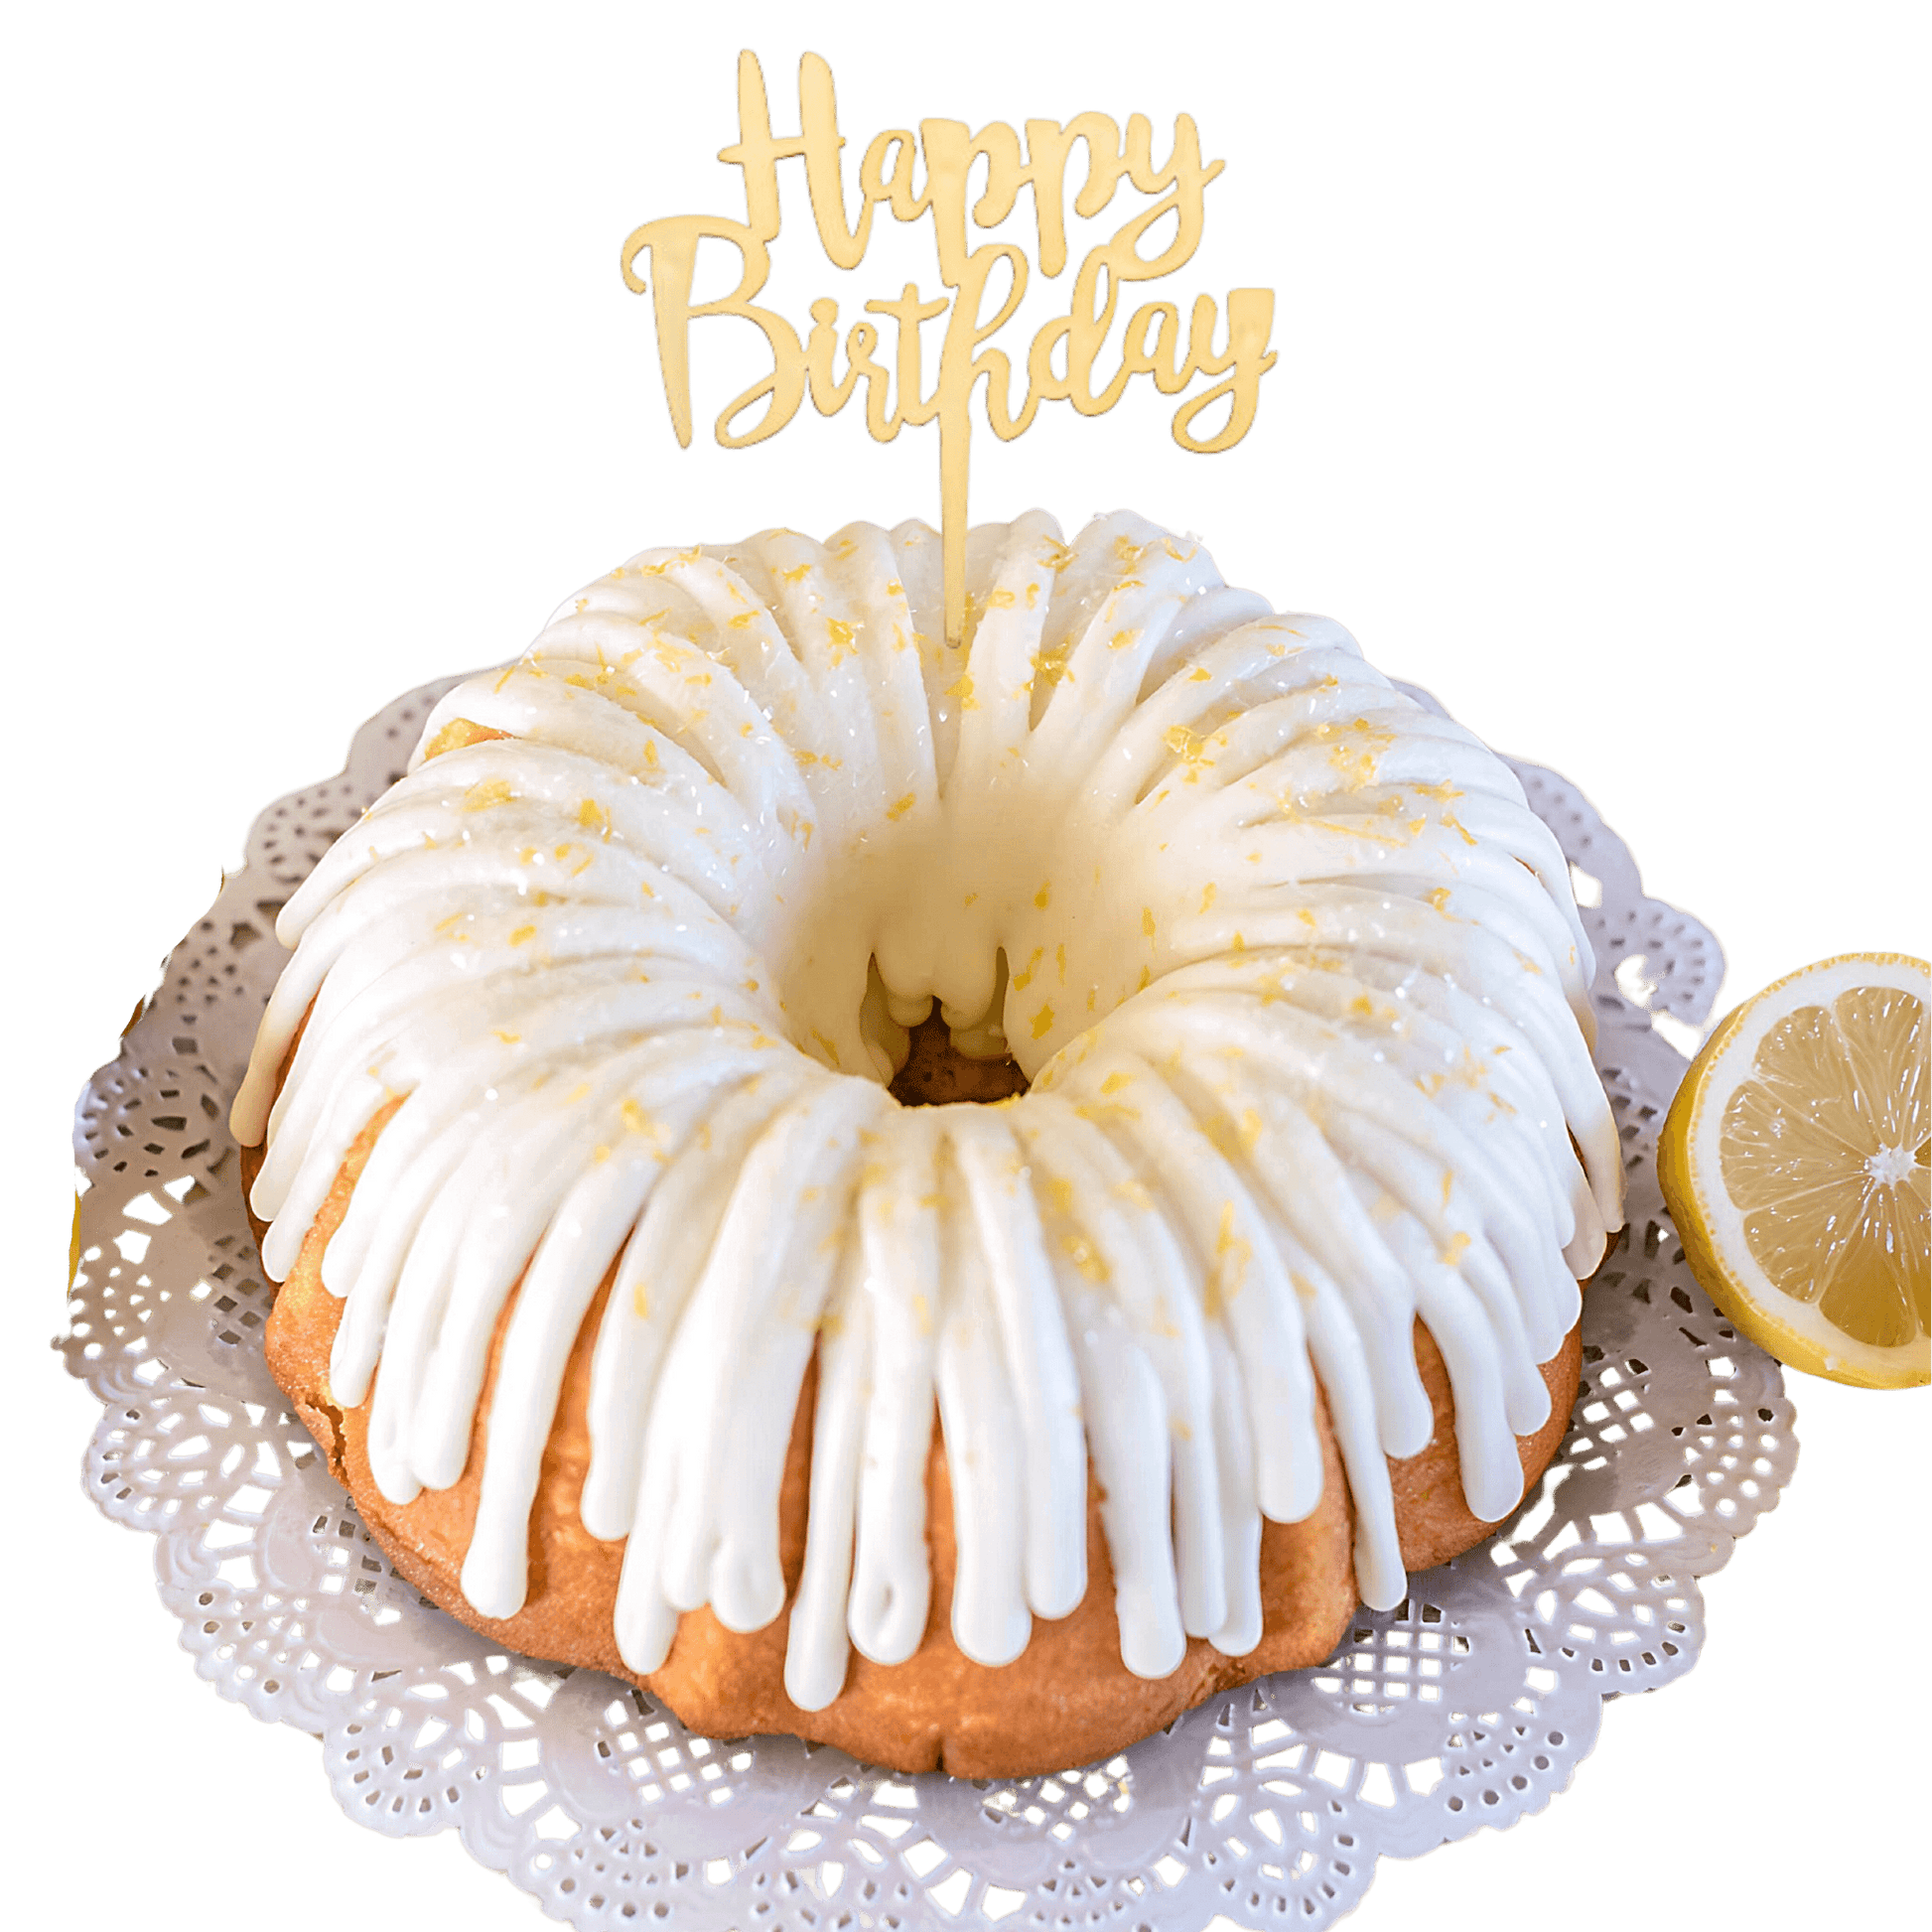 Lemon Squeeze Gold "HAPPY BIRTHDAY" Cake Topper & Candle Holder Bundt Cake - Wholesale Supplies